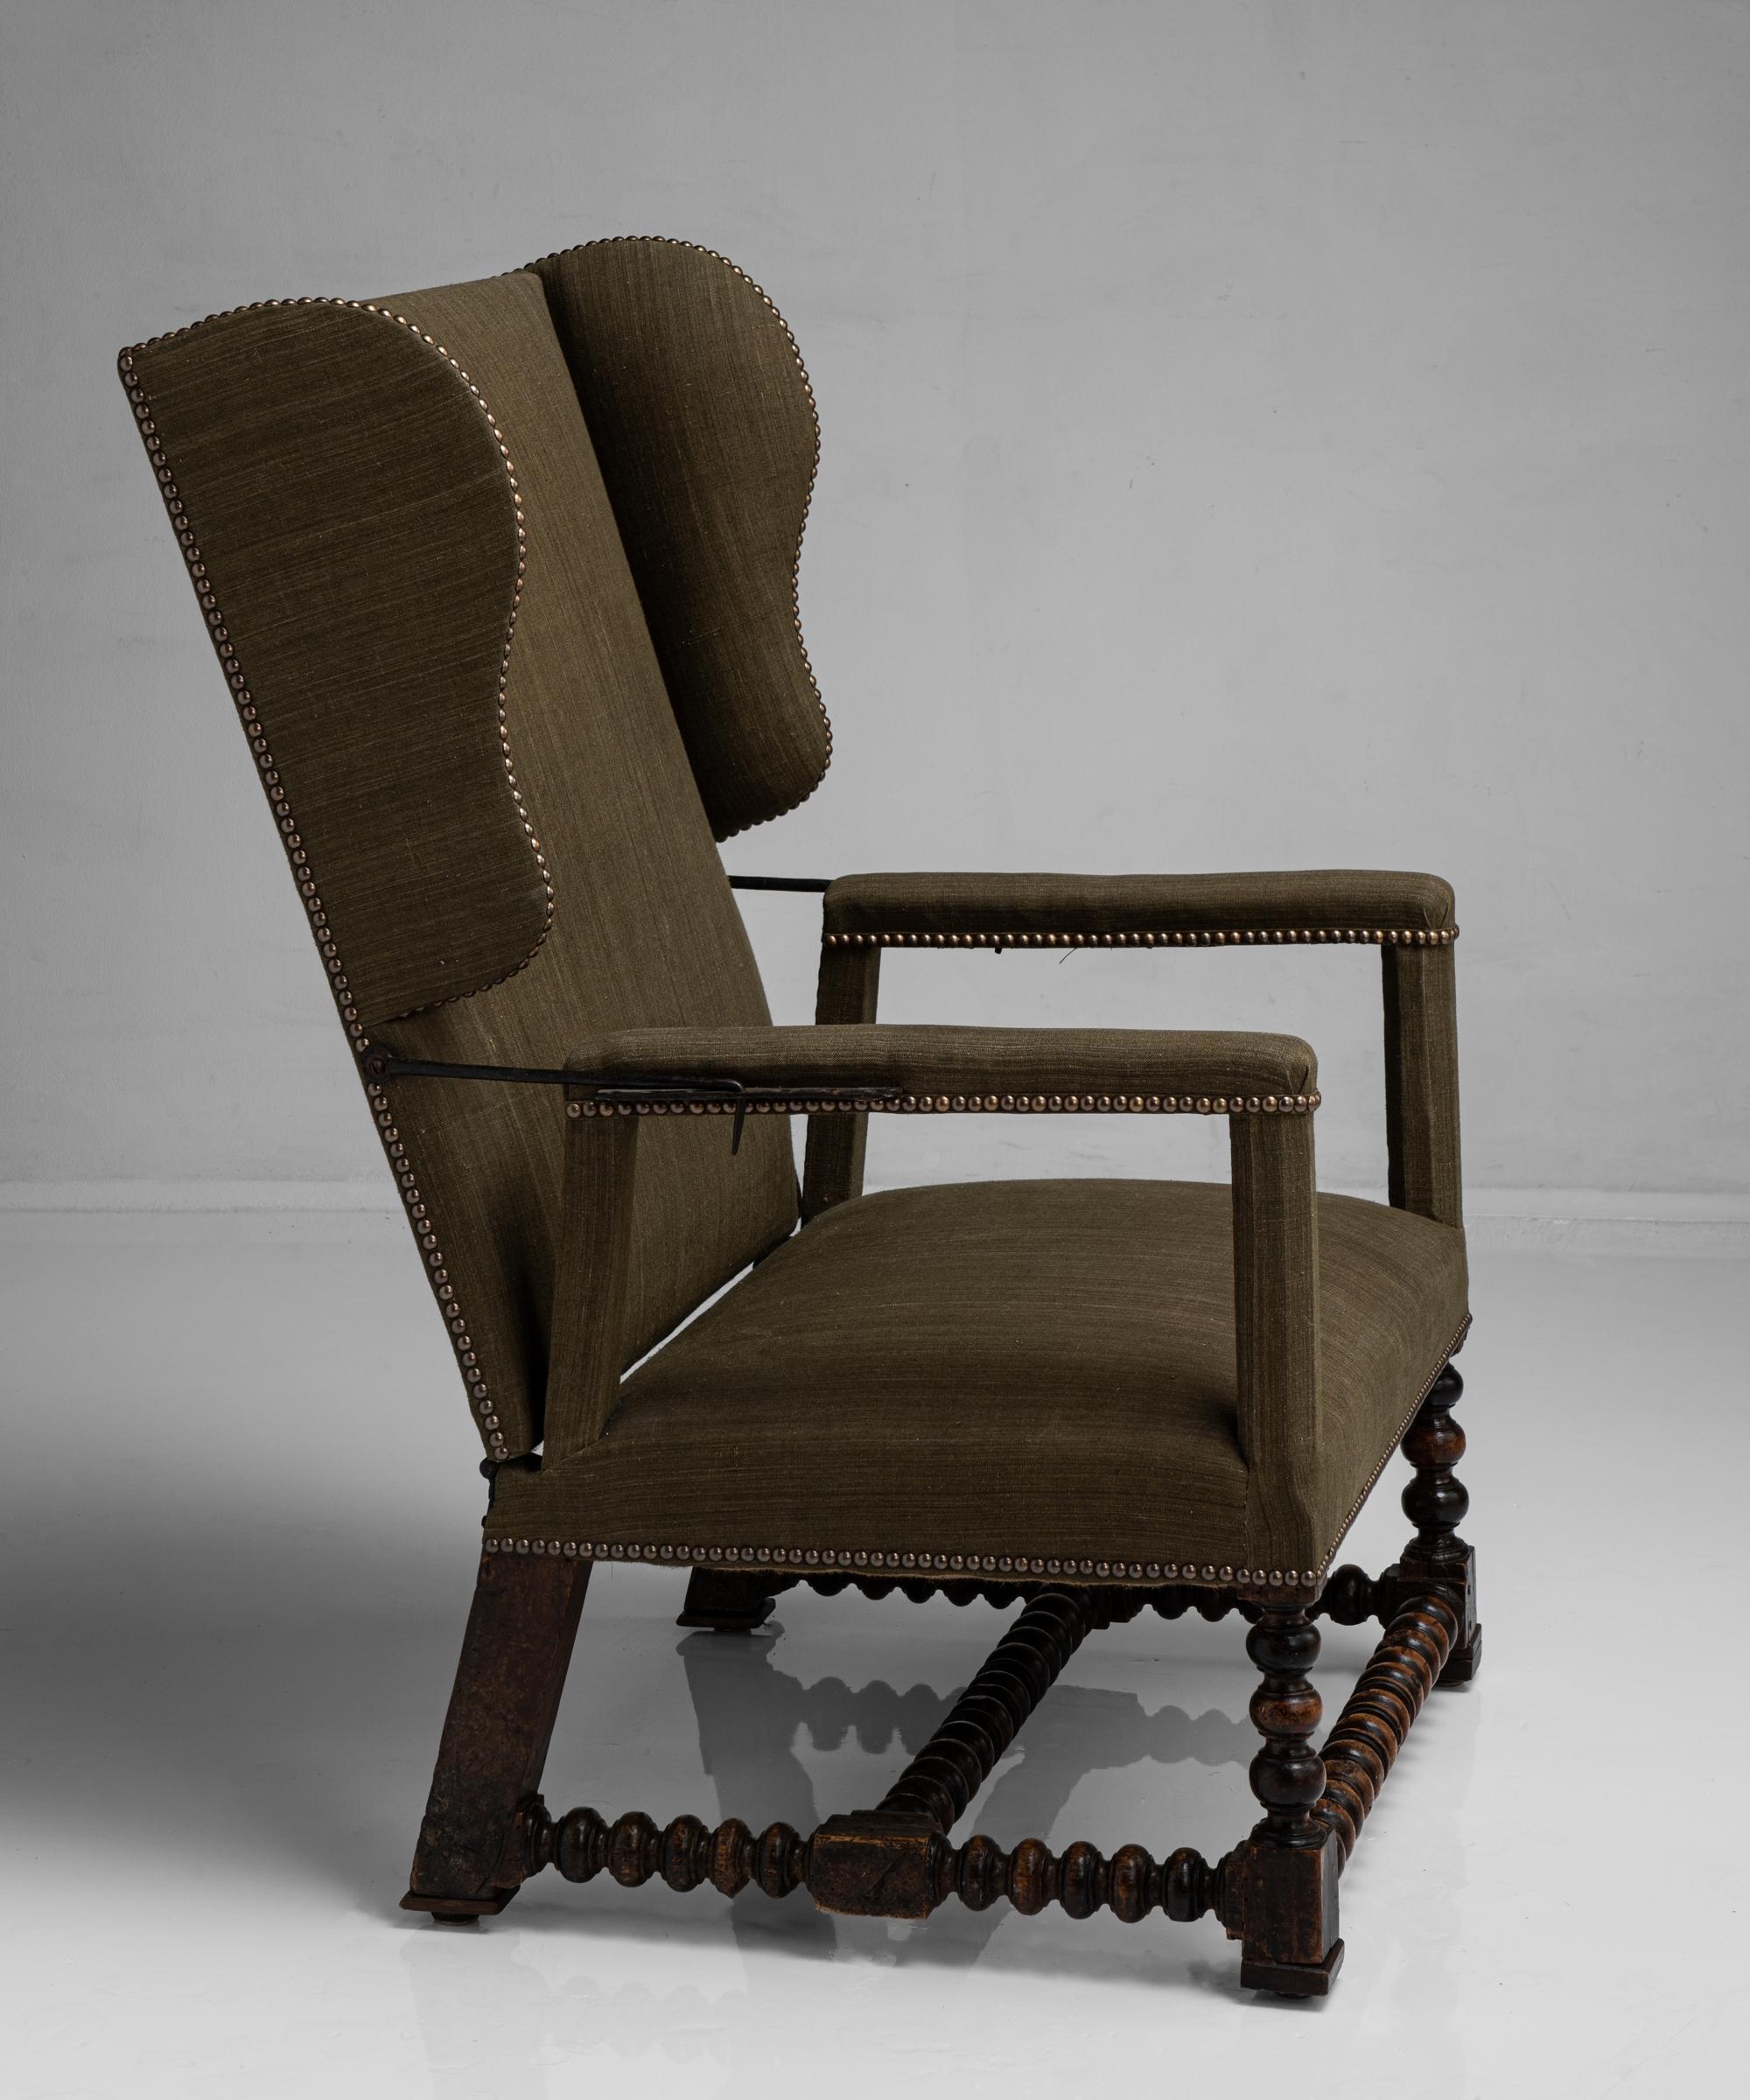 Walnut reclining armchair
France circa 1780

Newly upholstered, with bobbin turned legs and stretcher. Original reclining metalwork with four wrought iron pins and hole settings to each arm.

Measures: 27” W x 22” D x 41” H x 14”seat.